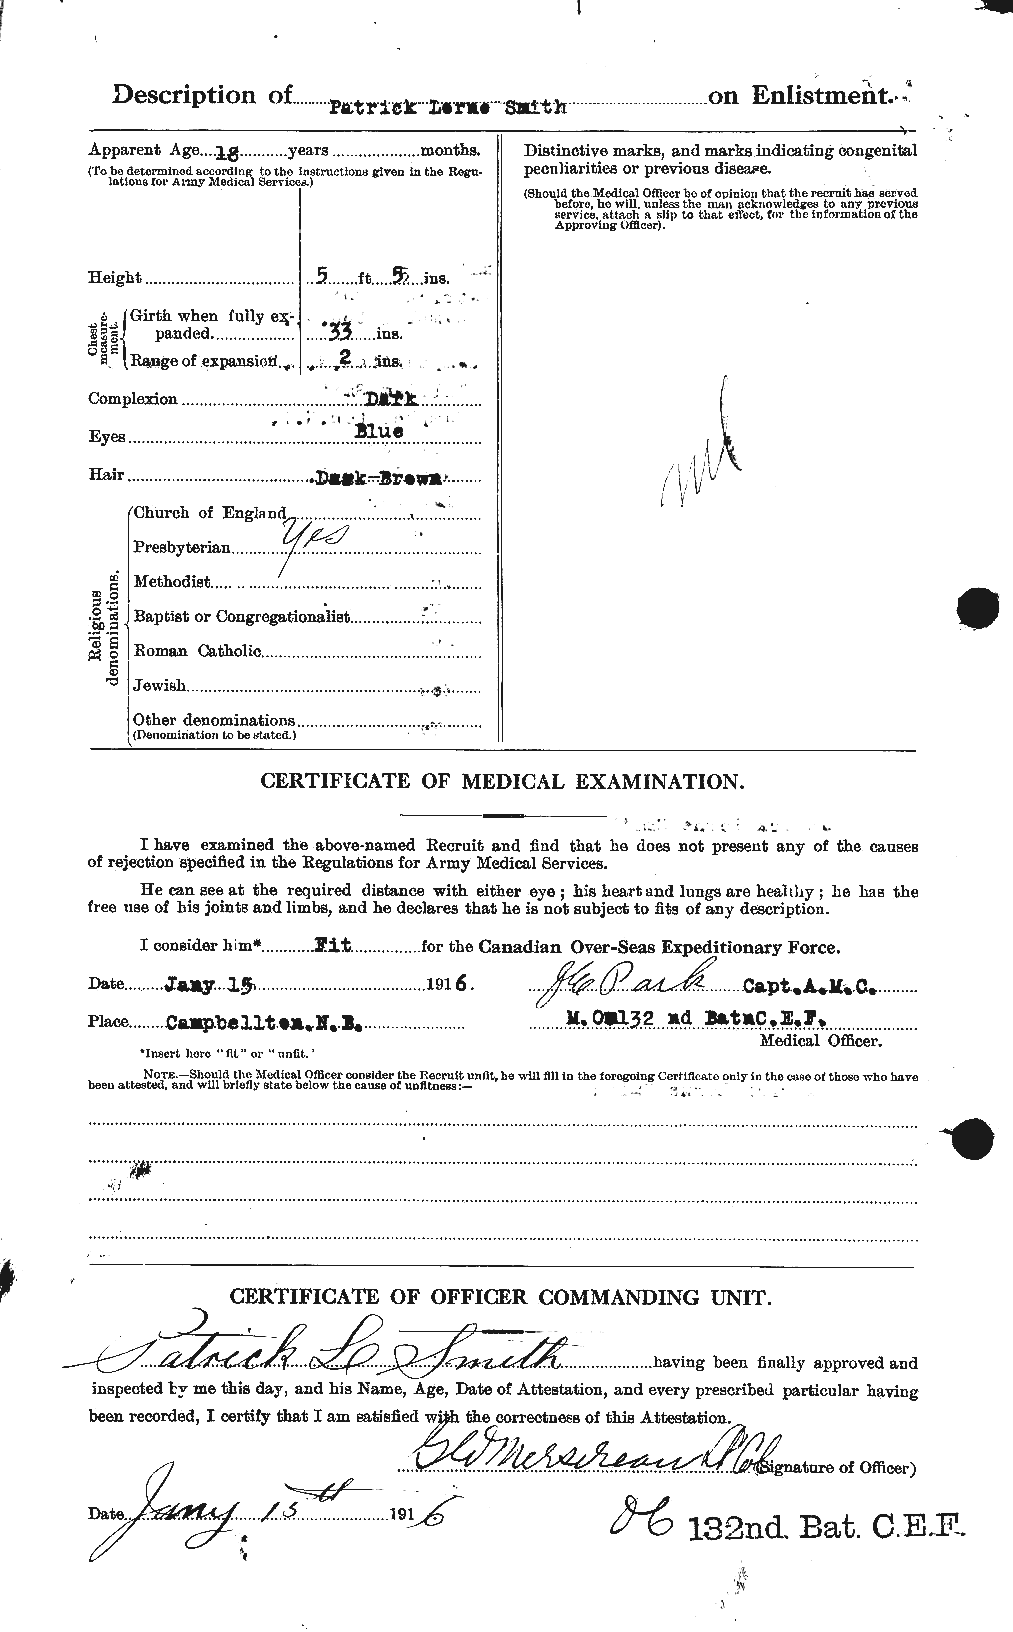 Personnel Records of the First World War - CEF 622136b